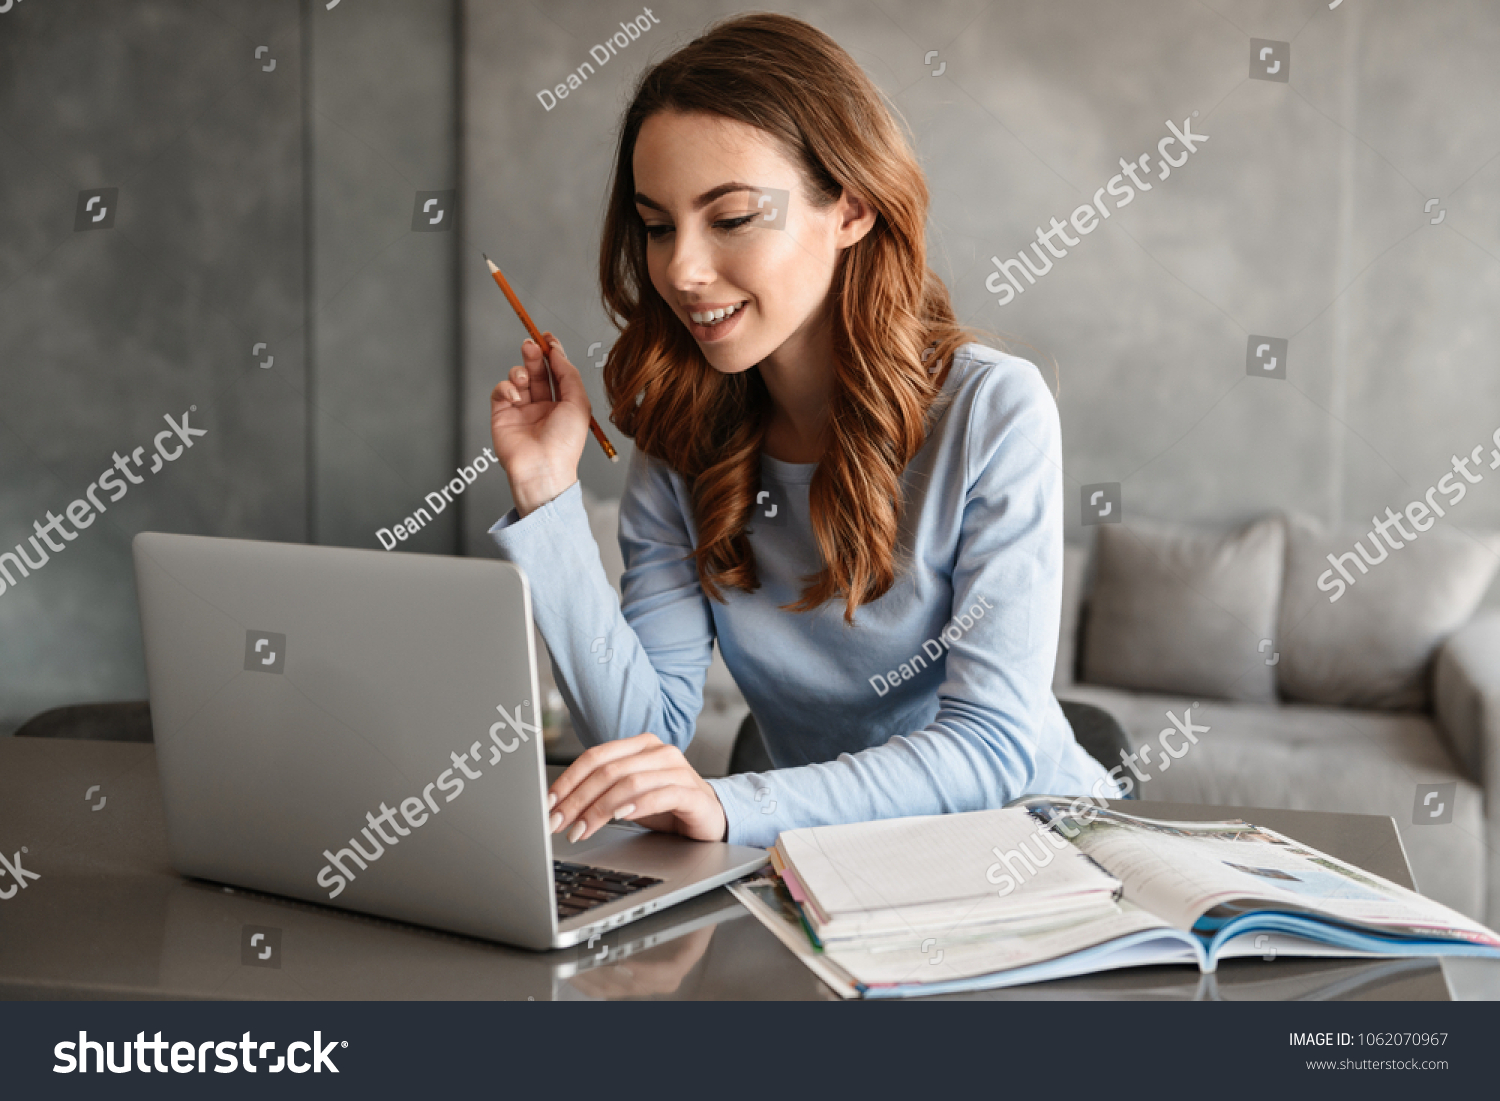 796,544 Studying computer Images, Stock Photos & Vectors | Shutterstock